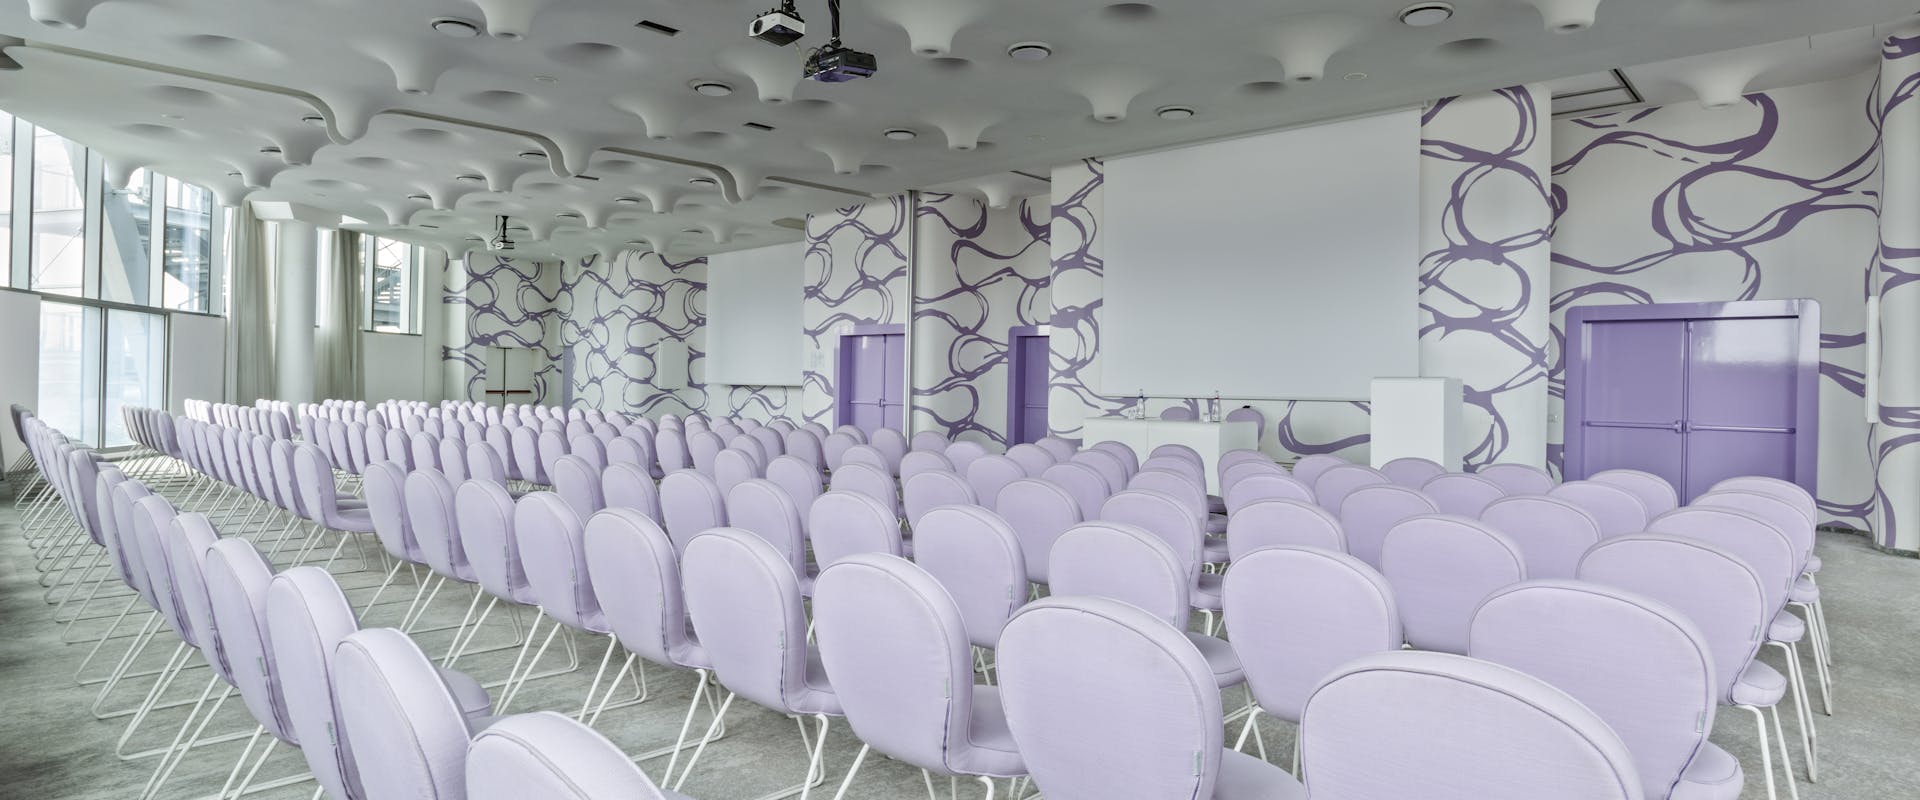 Meeting room with white floor, white chairs and white walls